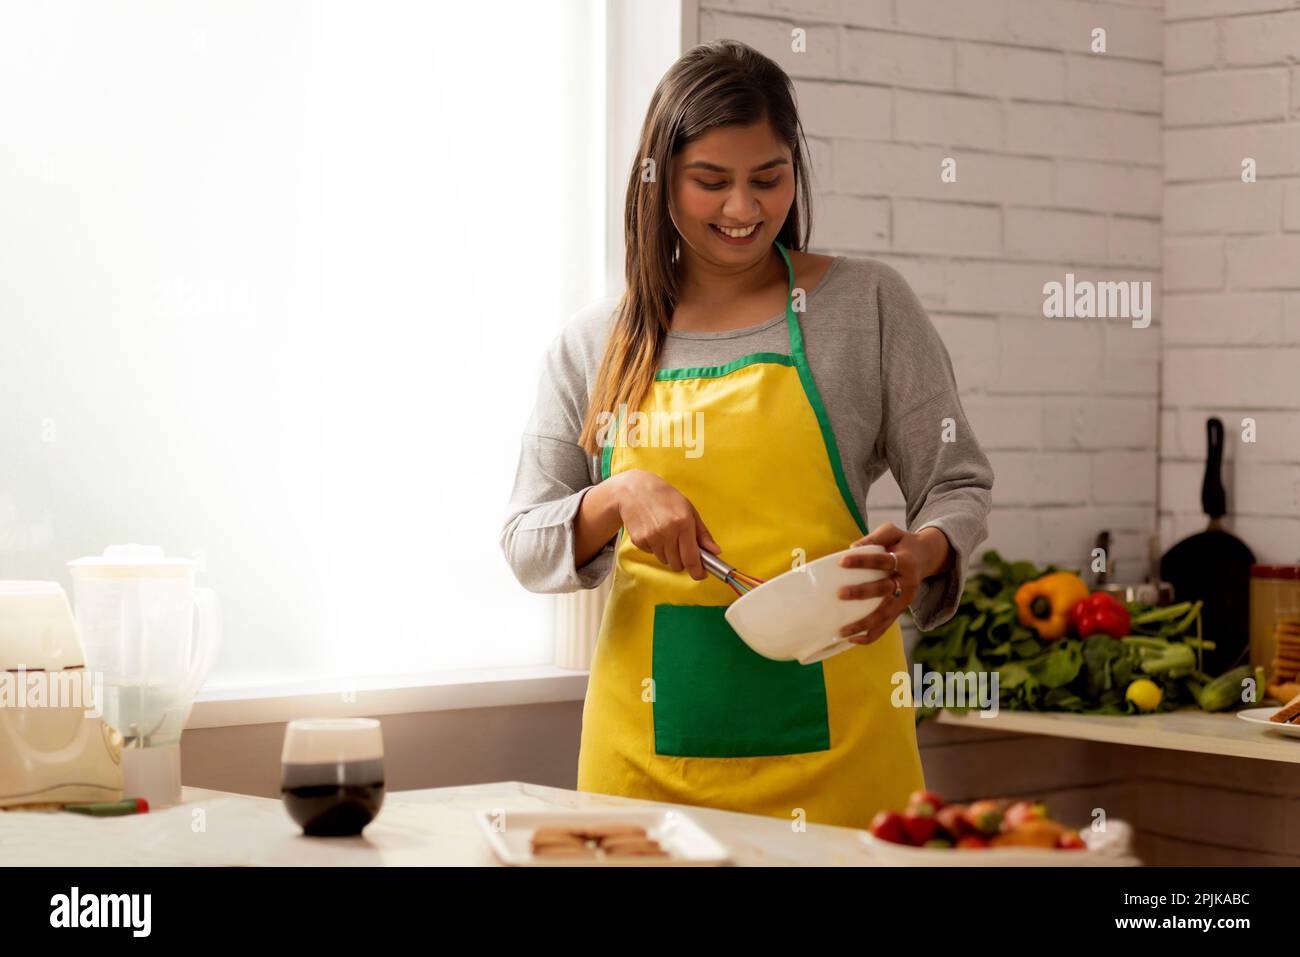 Portrait of smiling woman preparing for cookies in kitchen Stock Photo